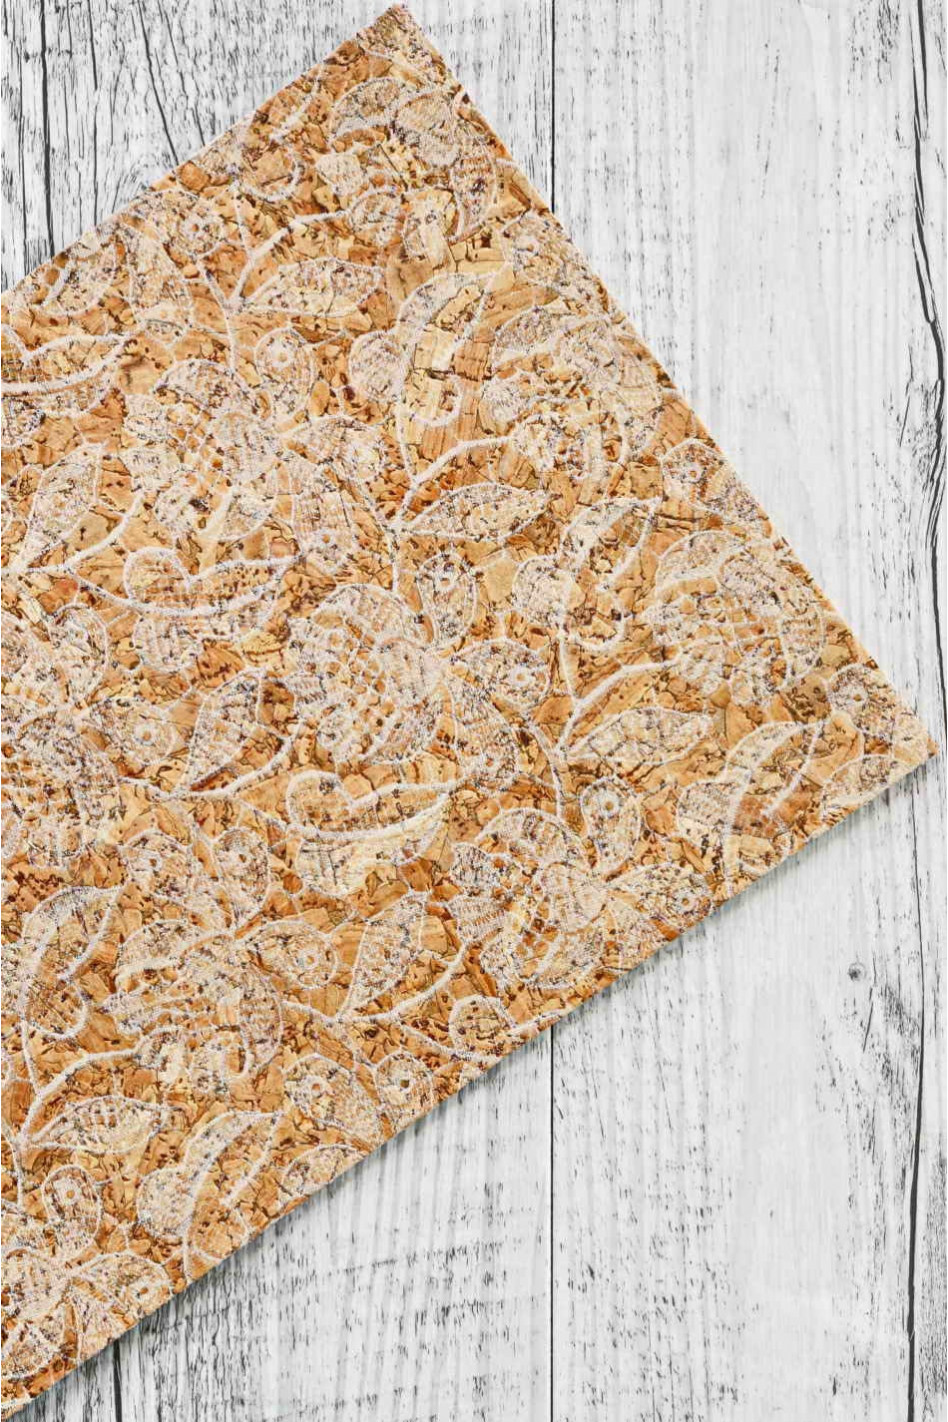 CORK sheets, made in Italy, white floral textured, print flowers